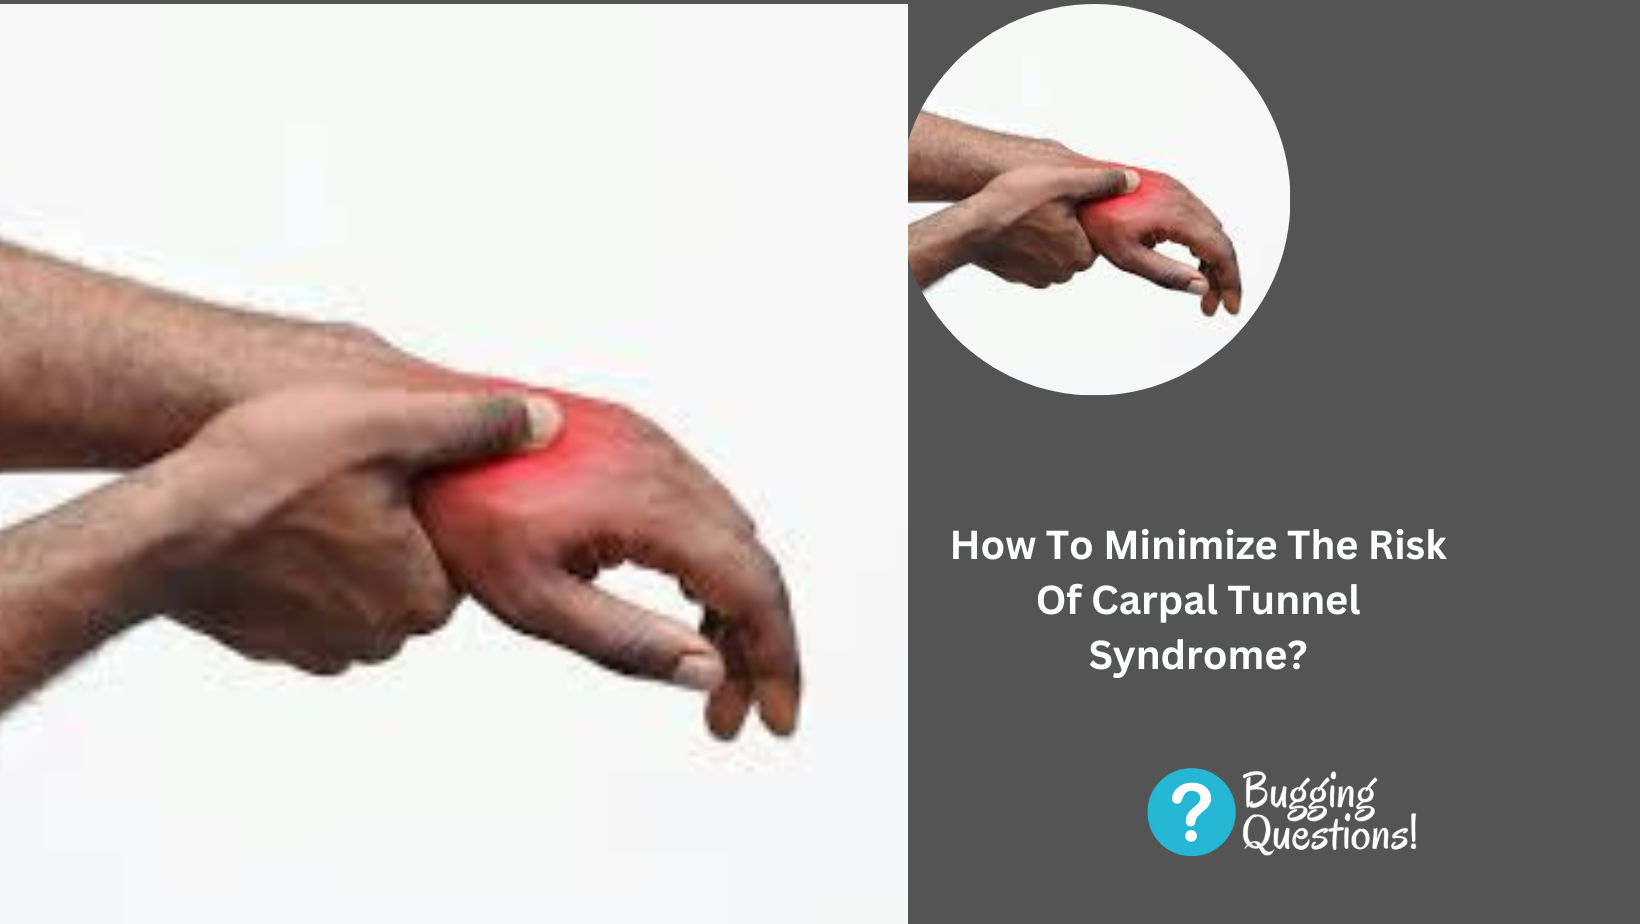 How To Minimize The Risk Of Carpal Tunnel Syndrome?